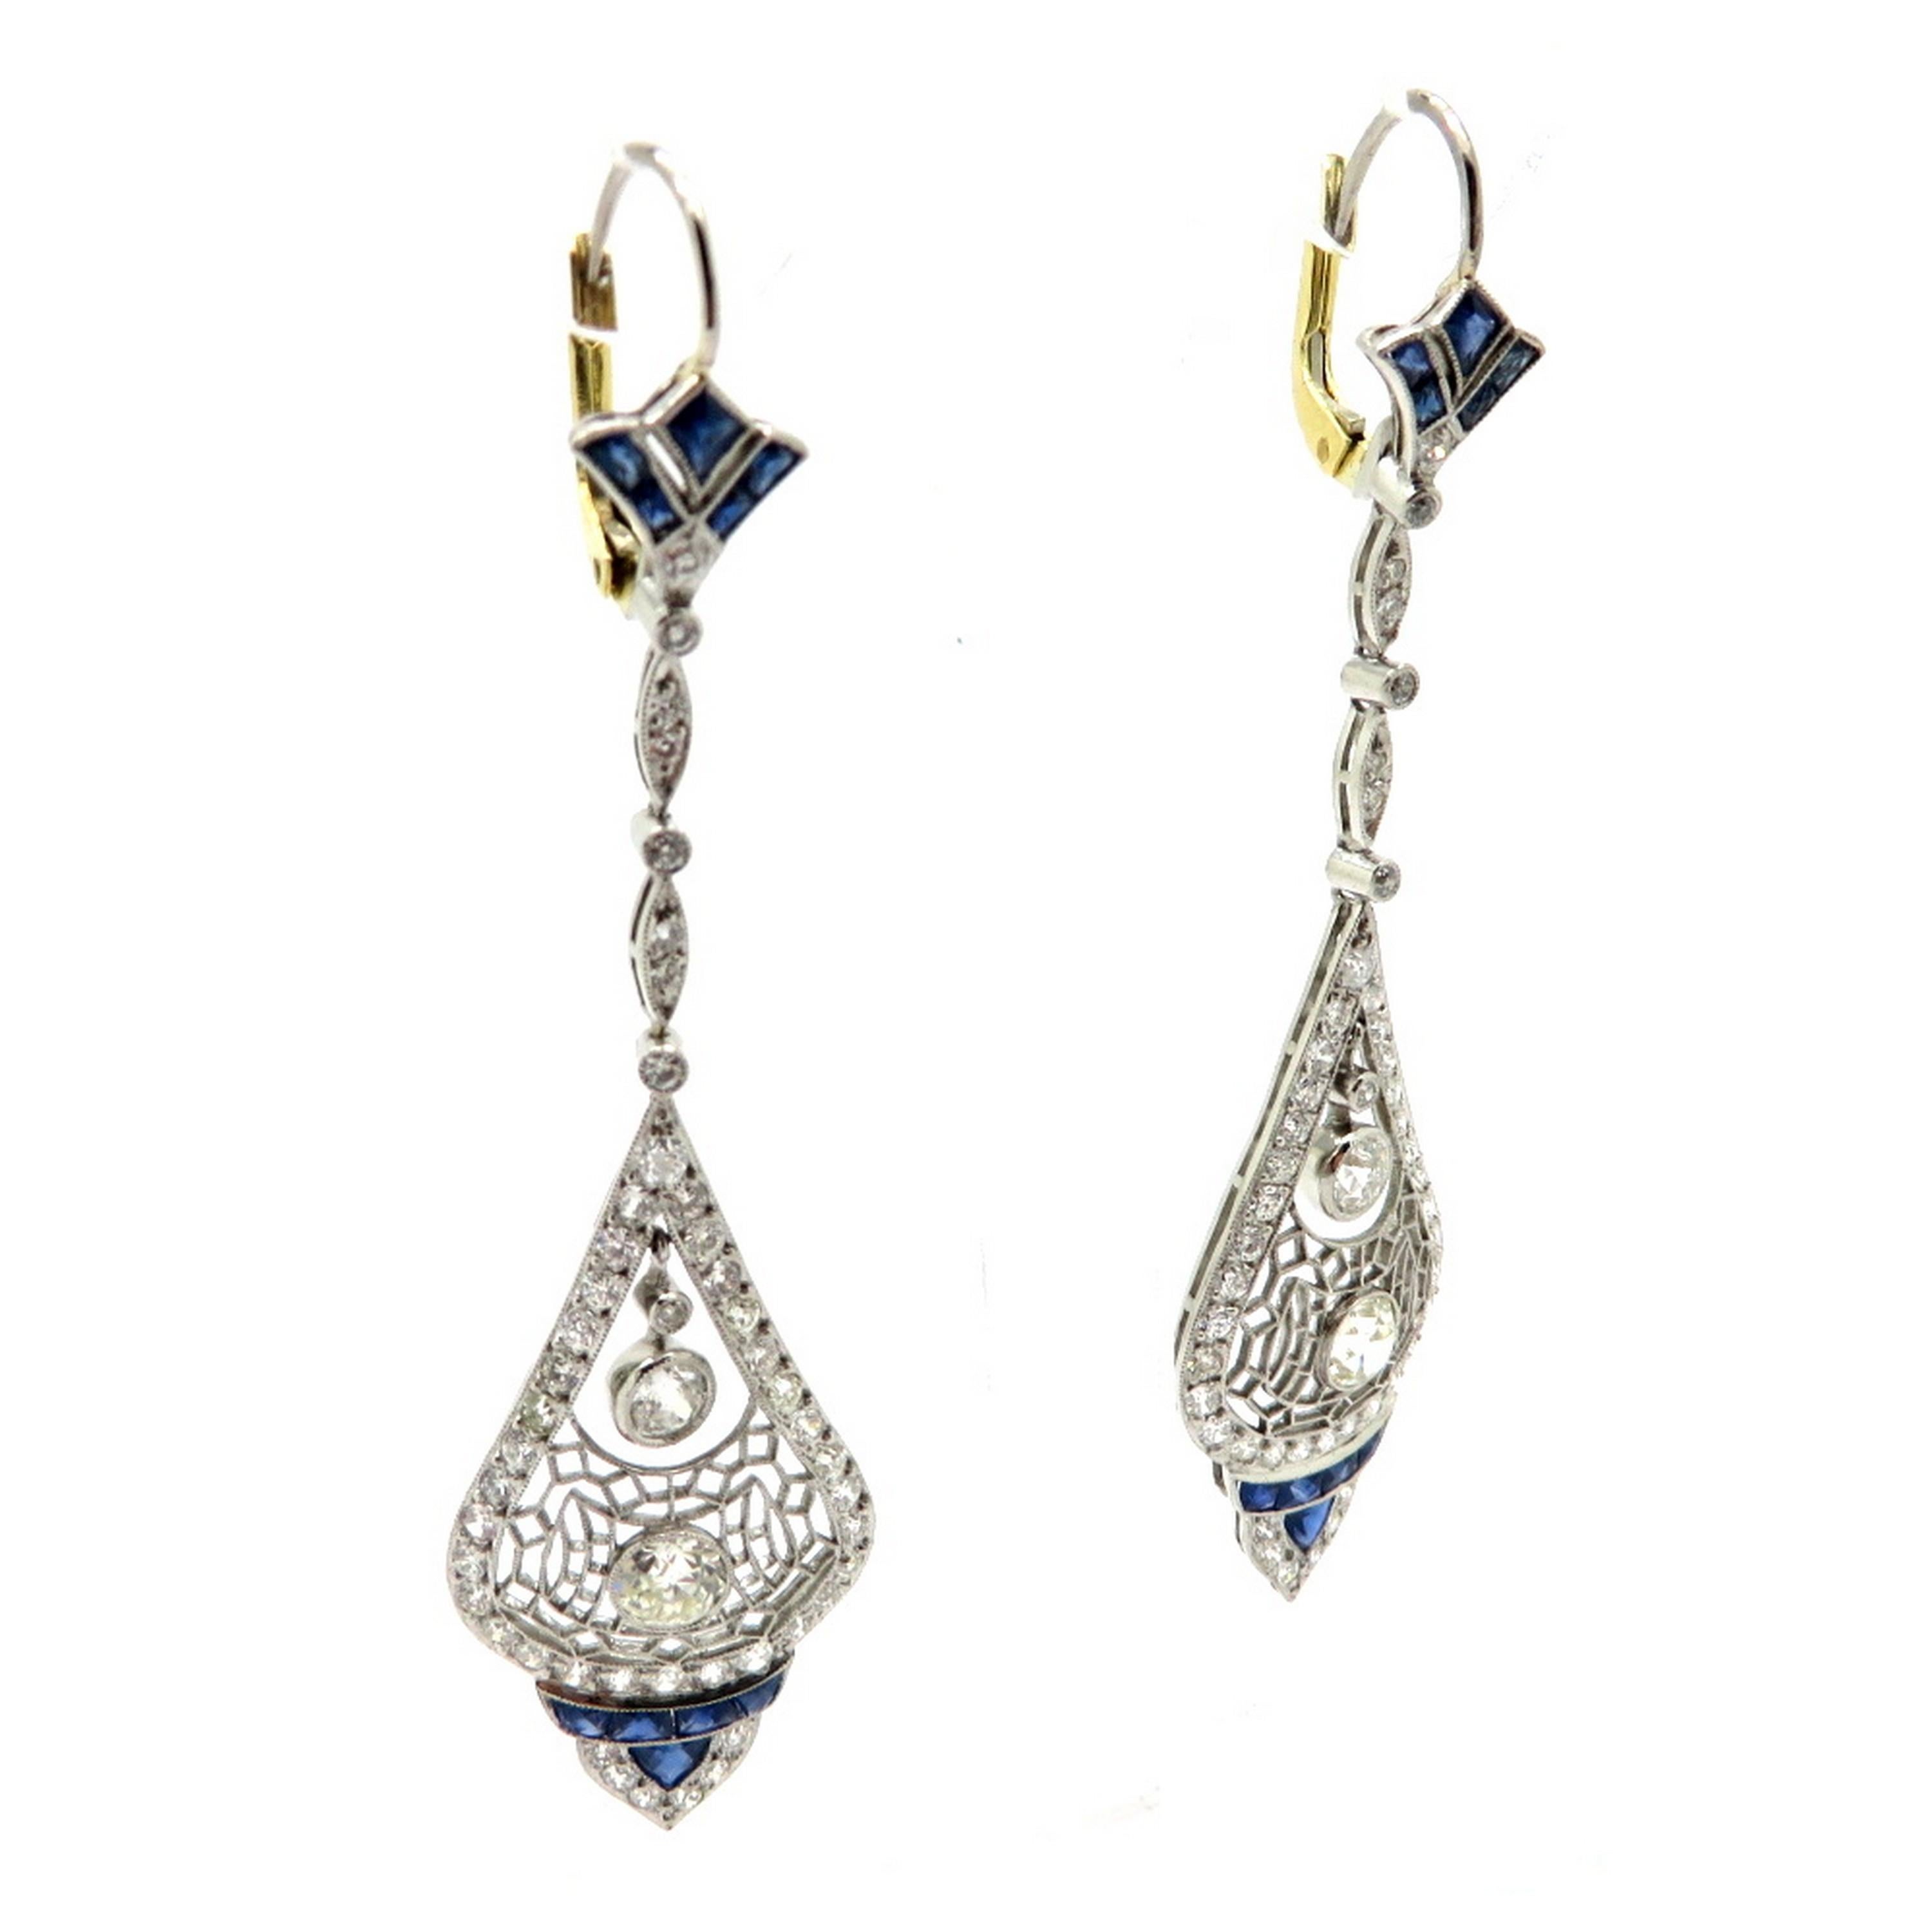 Estate platinum Art Deco style Old European cut diamond and sapphire platinum dangle earrings. Showcasing two Old European cut diamonds weighing a total of 0.40 carats, having H color grade and SI1 clarity grade. Interspersed with numerous Old